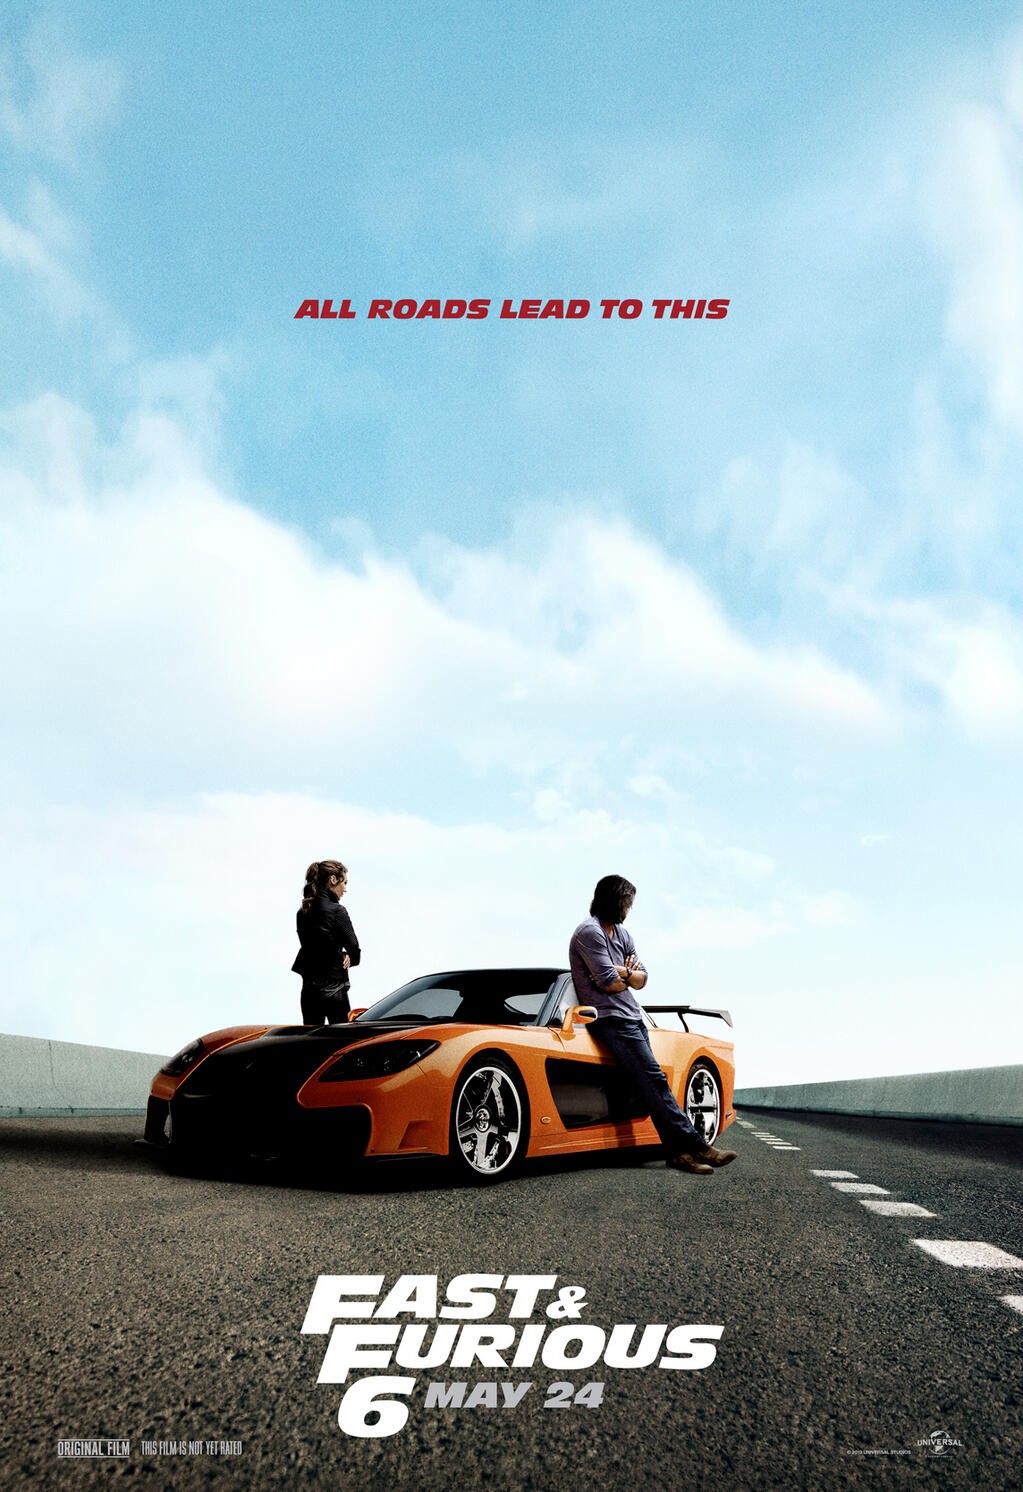 Fast And Furious 6 Poster Gal Gadot And Sung Kang Gal gadot stars in fast and the furious 6. fast and furious 6 poster gal gadot